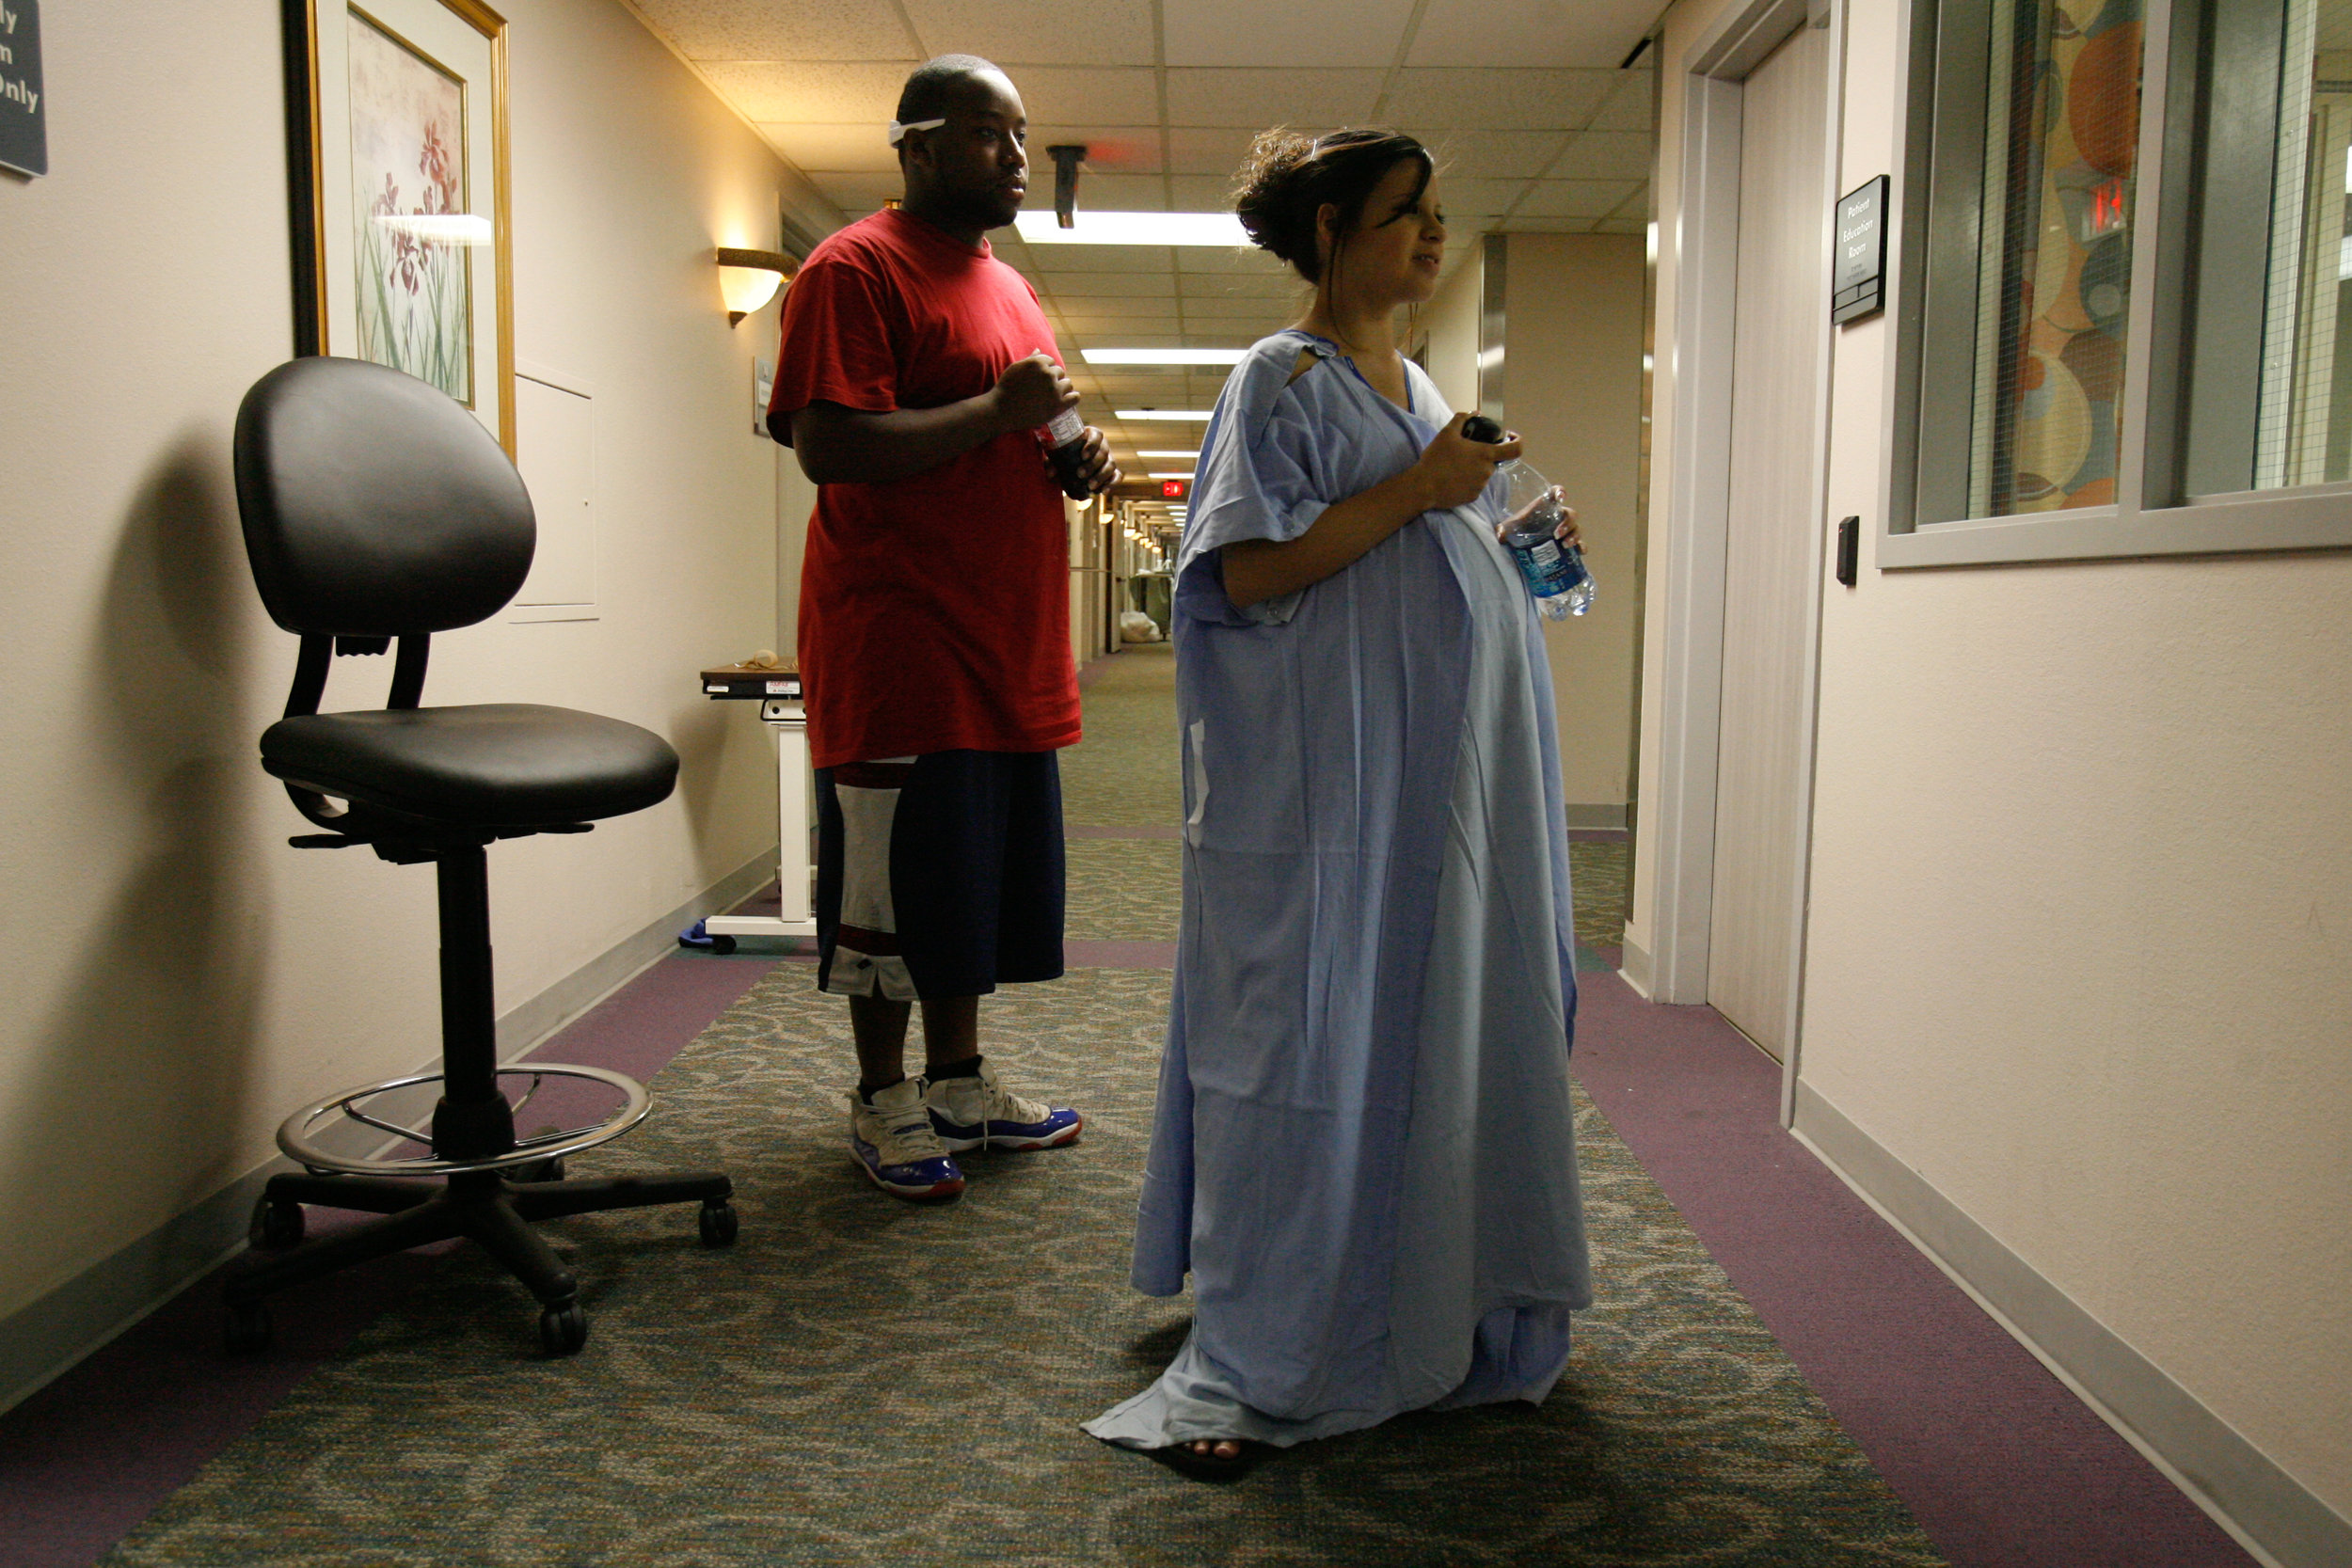  Deana Martinez, 17, right, and her boyfriend, Jyrick Sutton, look into the nursery window while walking the halls to speed up her labor late at night, May 20, 2008, at Medical Center Hospital in Odessa, Texas. 